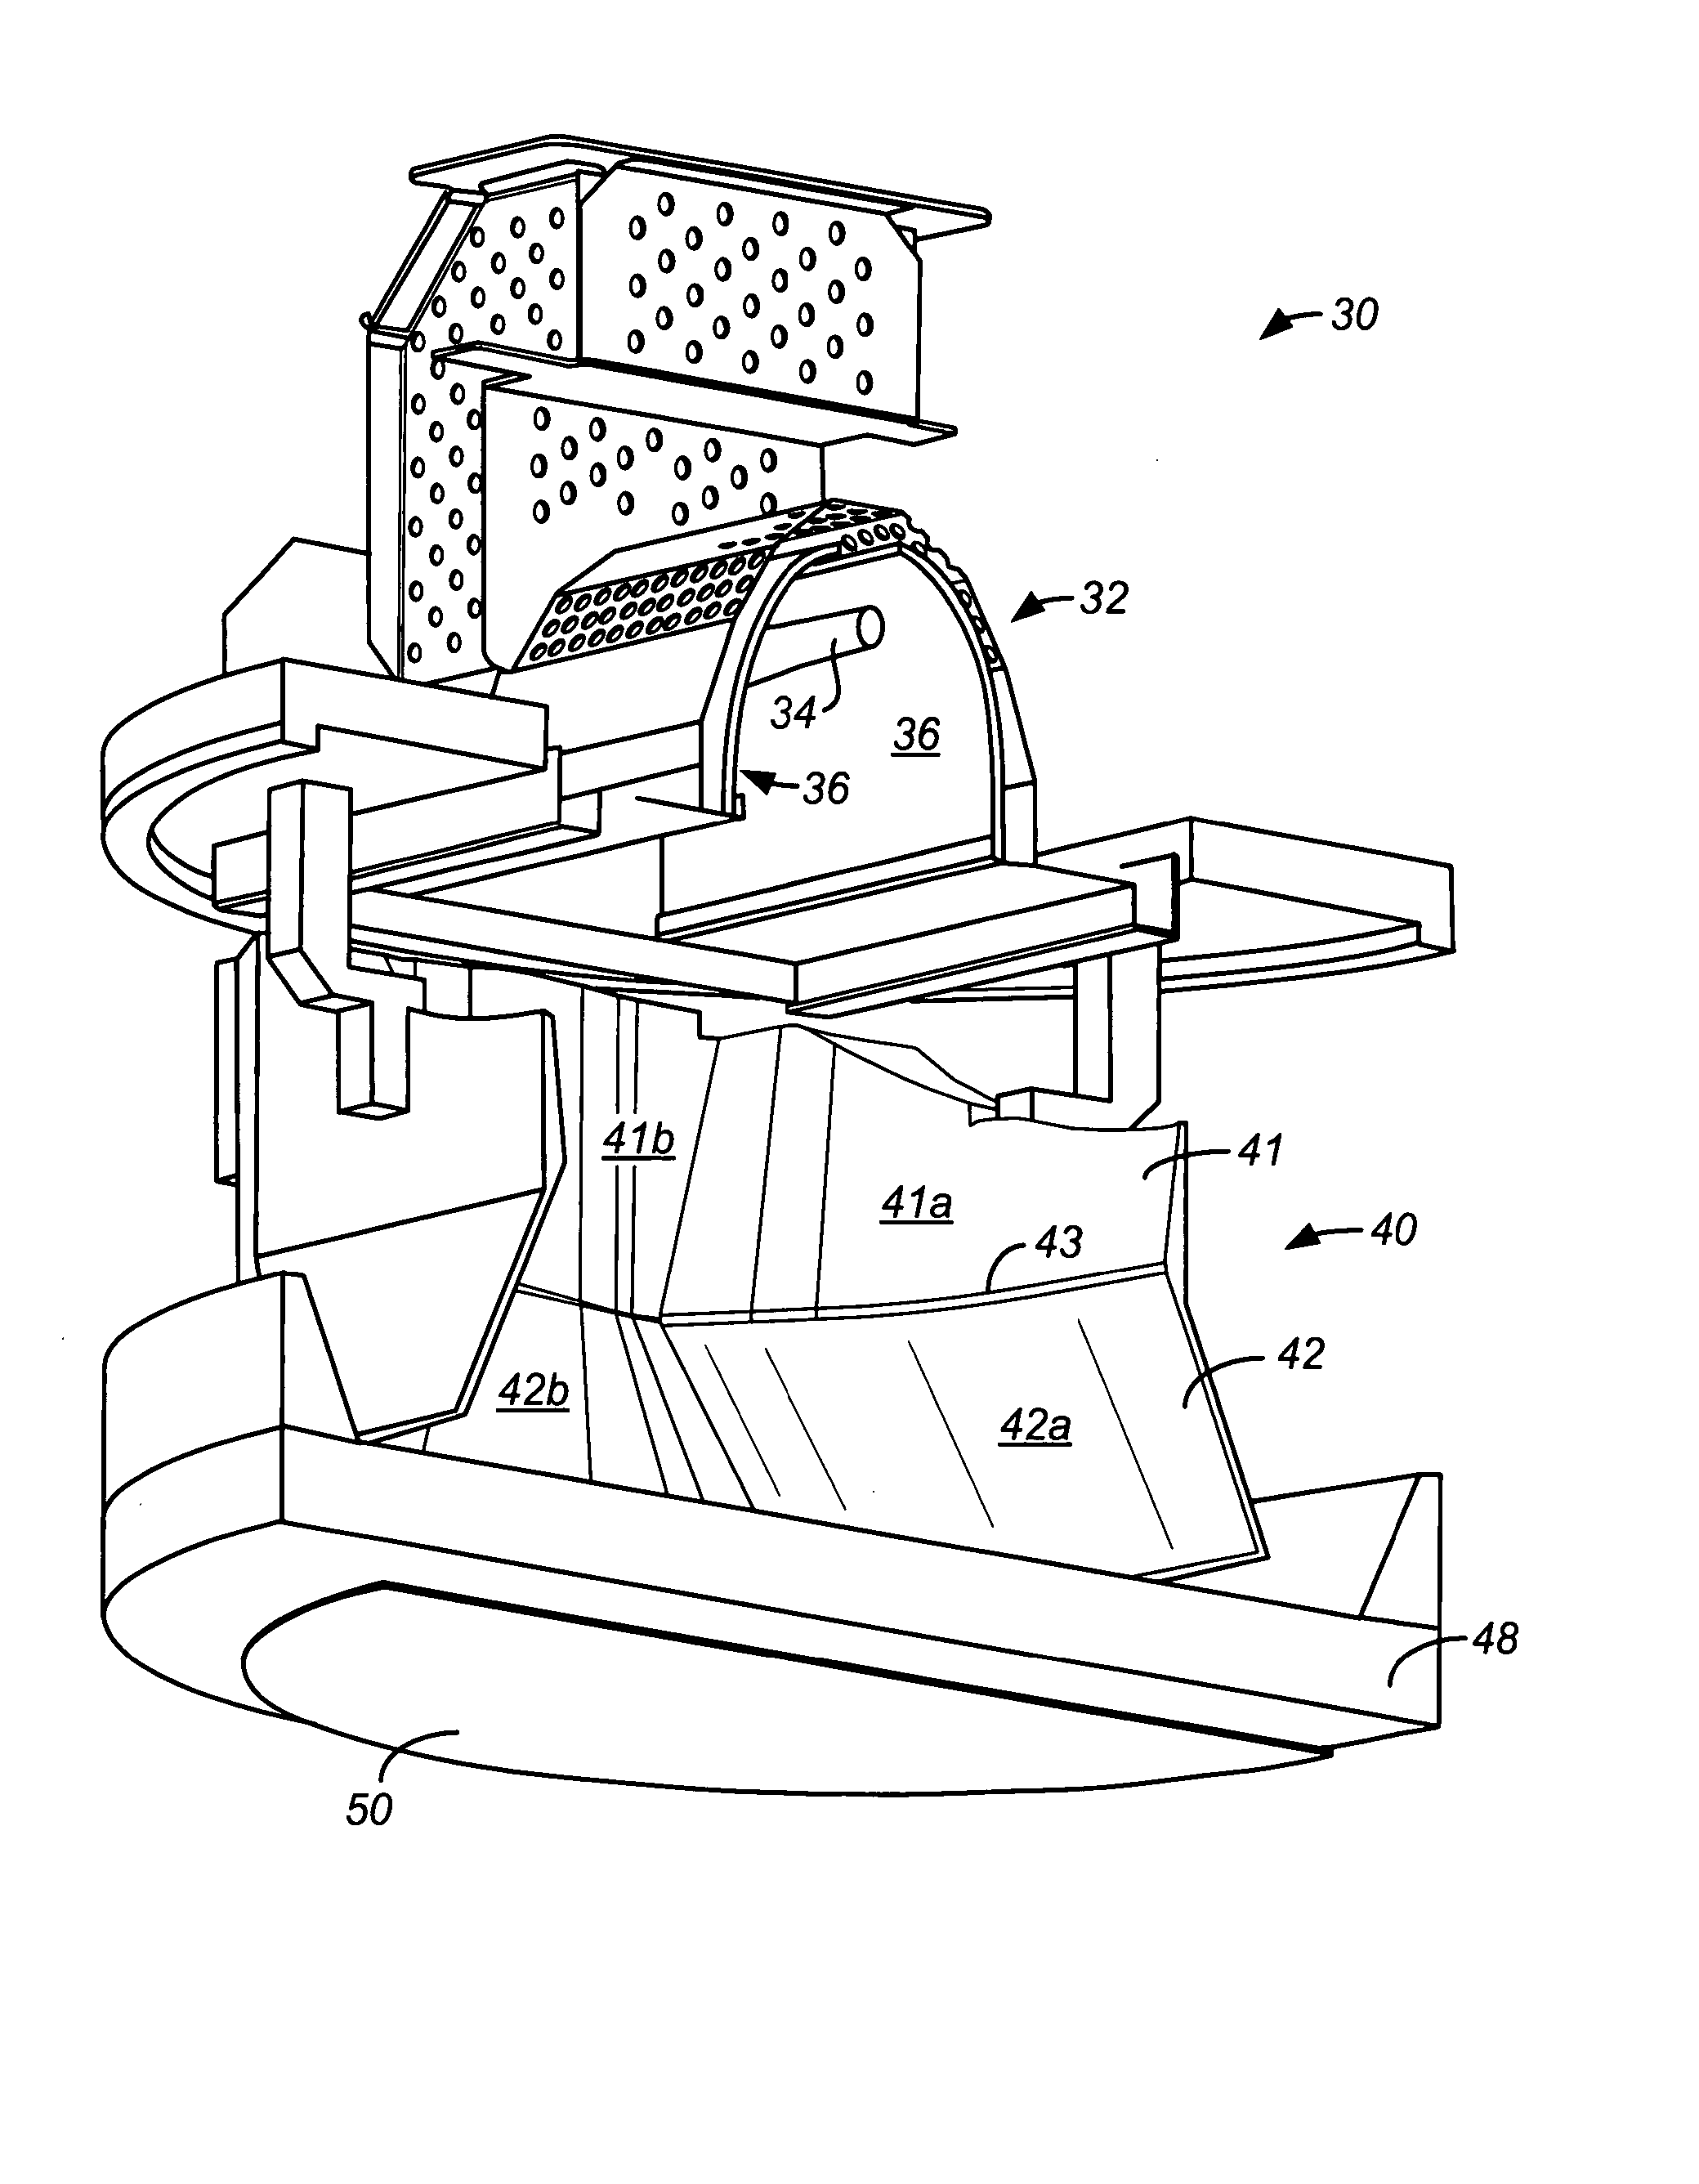 Apparatus and method for exposing a substrate to UV radiation using asymmetric reflectors